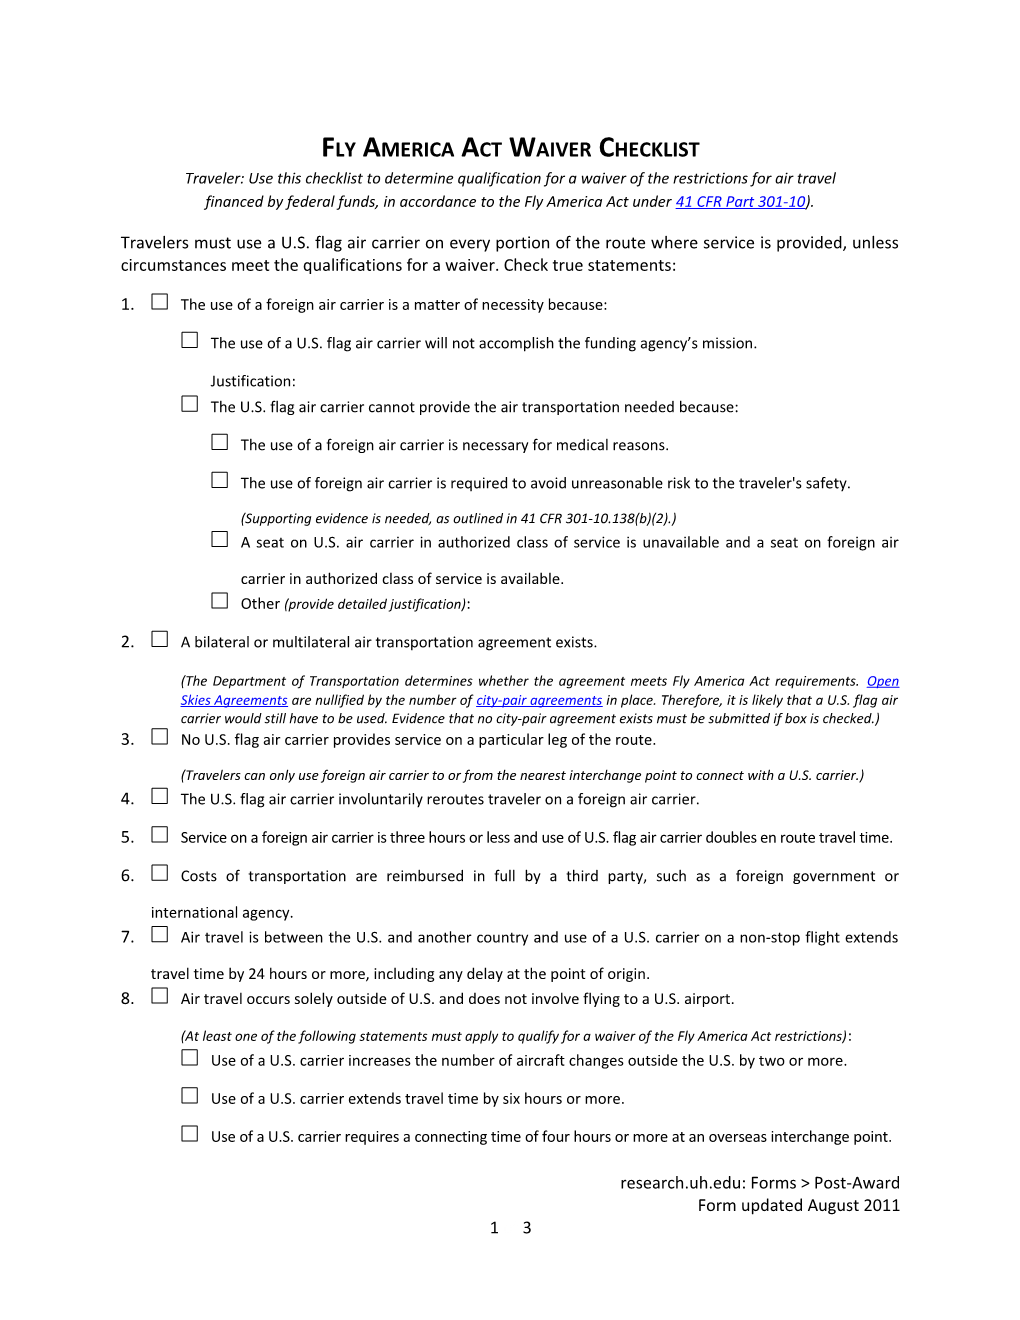 Fly America Act Waiver Checklist Traveler: Use This Checklist to Determine Qualification